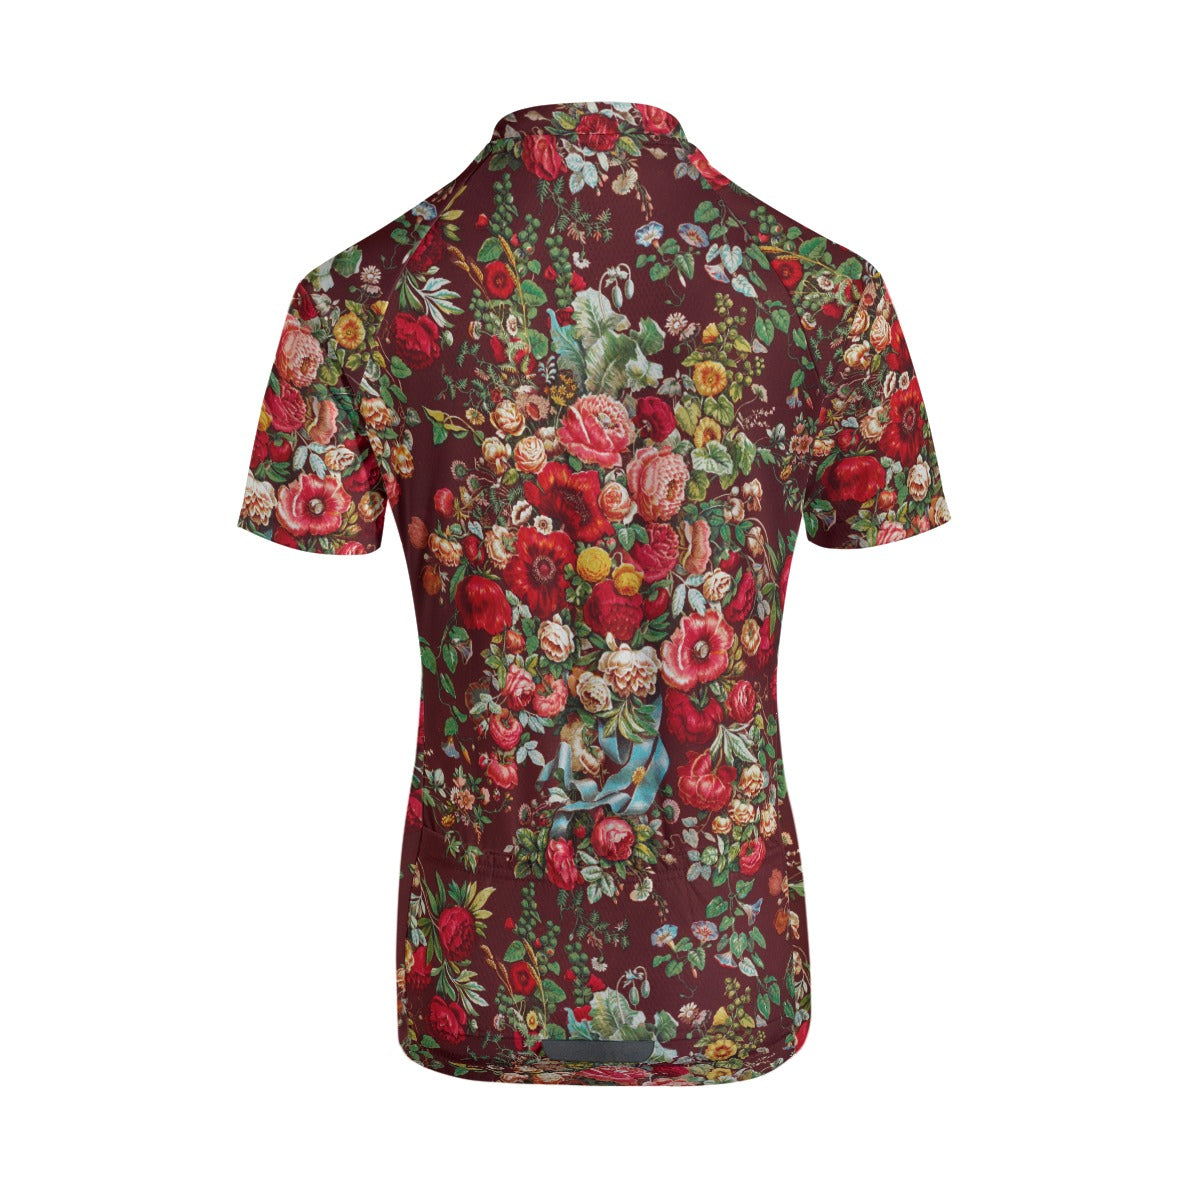 Vintage-inspired chintz pattern jersey for cyclists